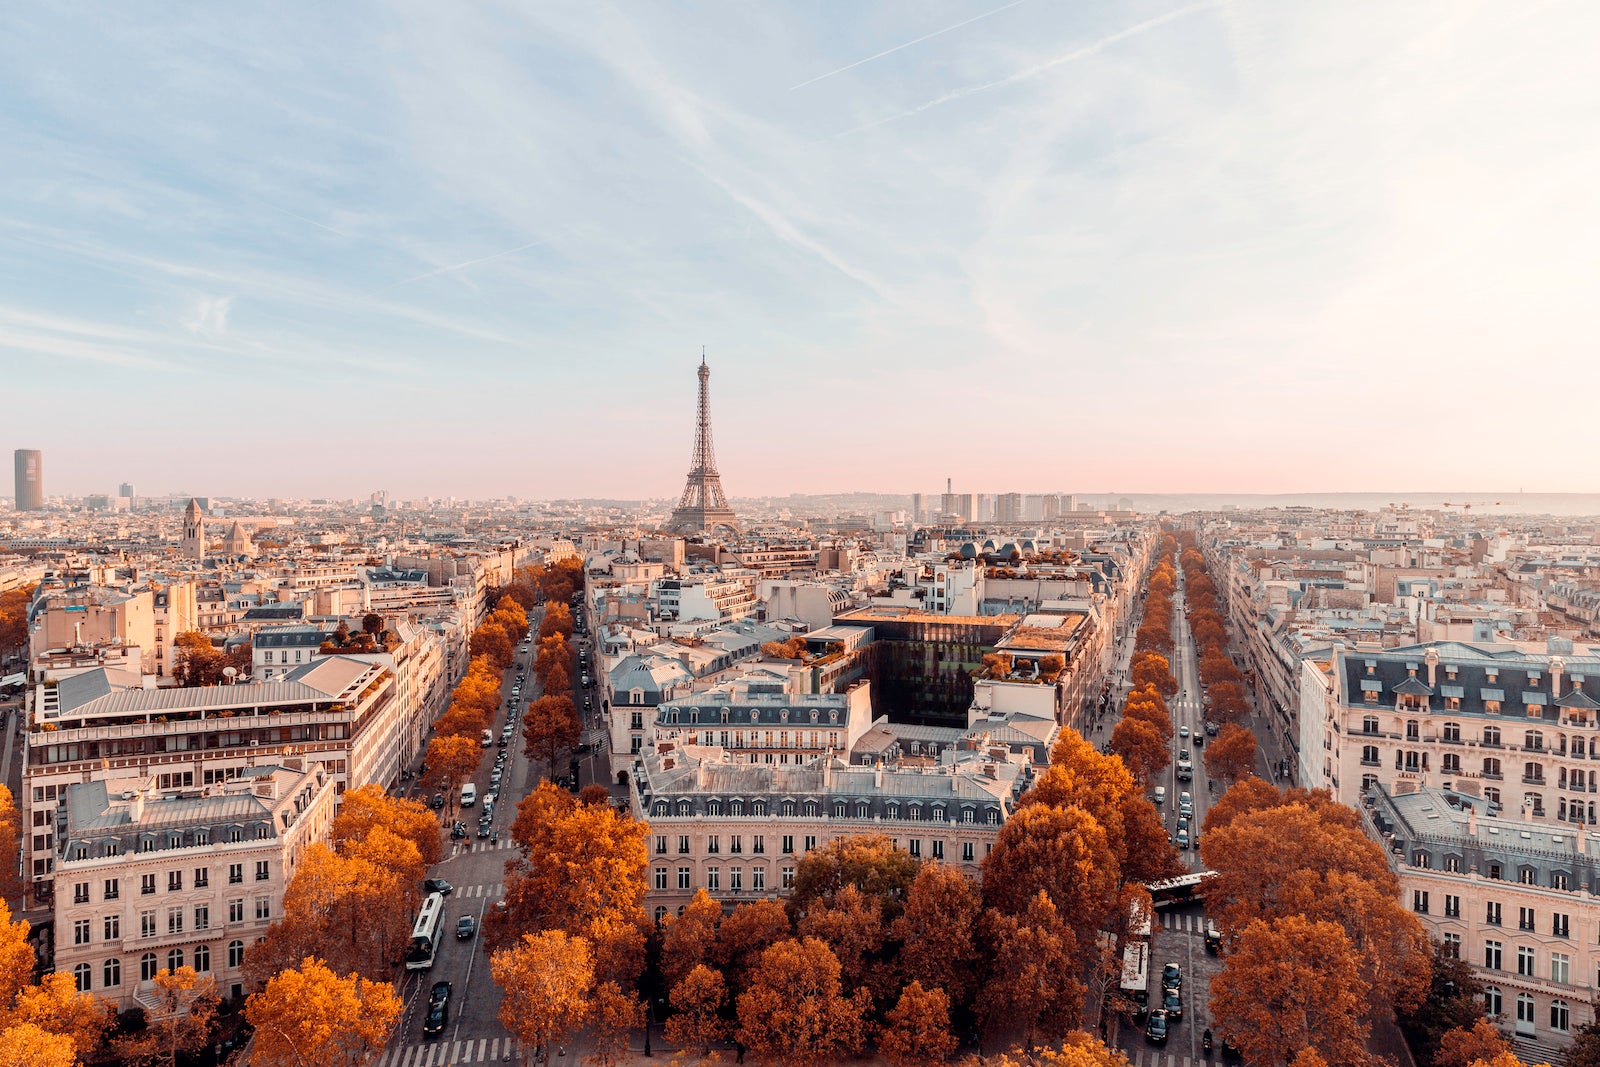 Eiffel Tower and Paris skyline in autumn, aerial view, France